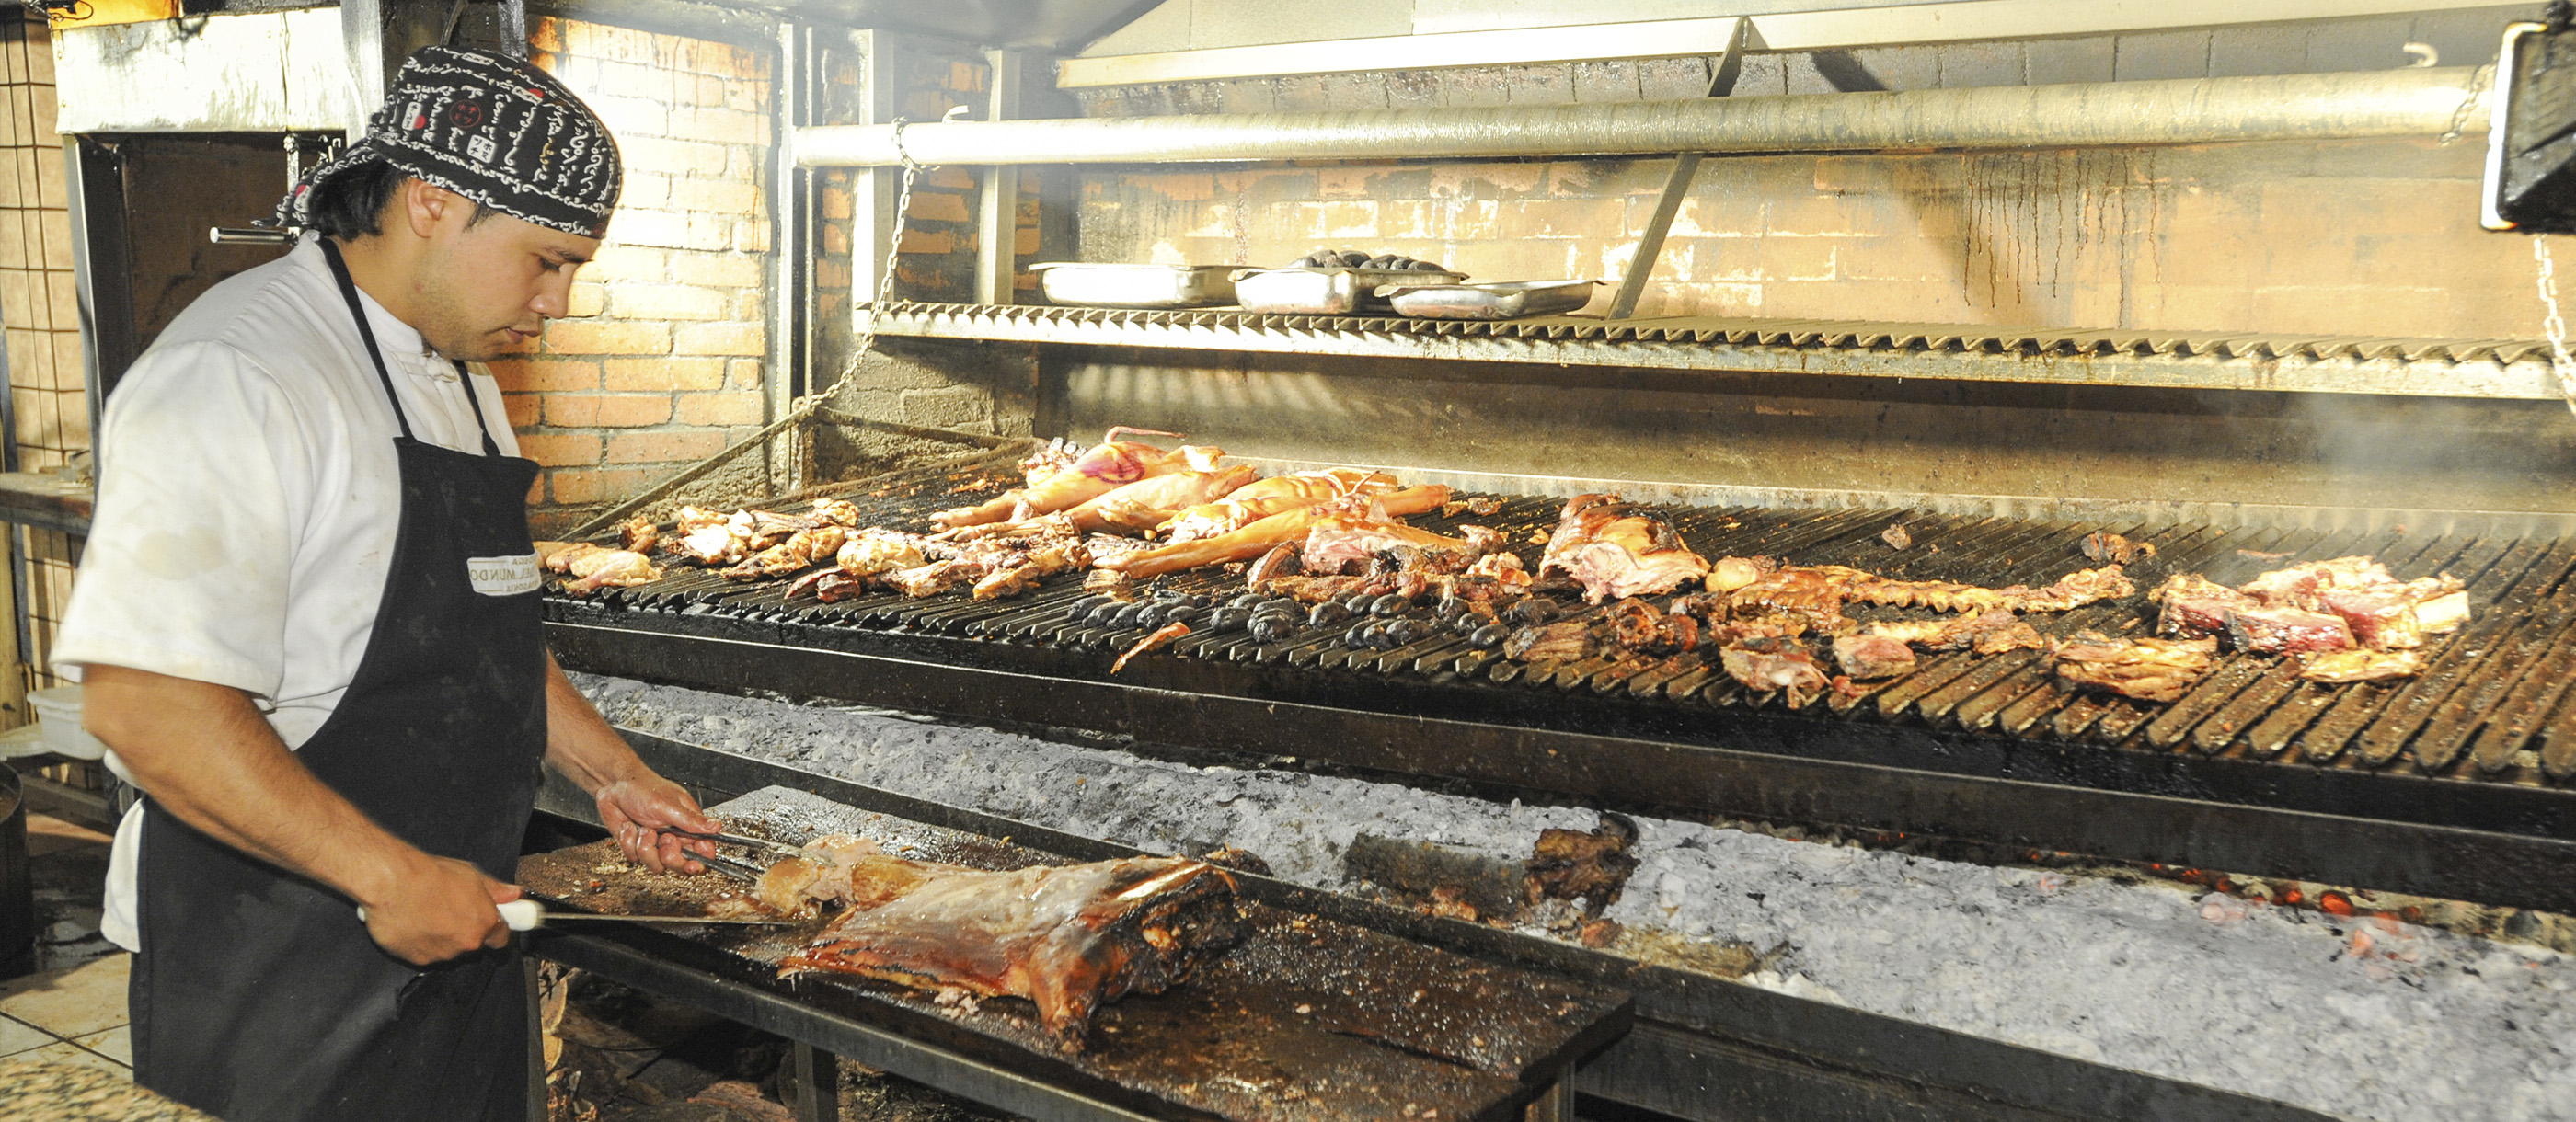 Parrilla | Traditional From Argentina